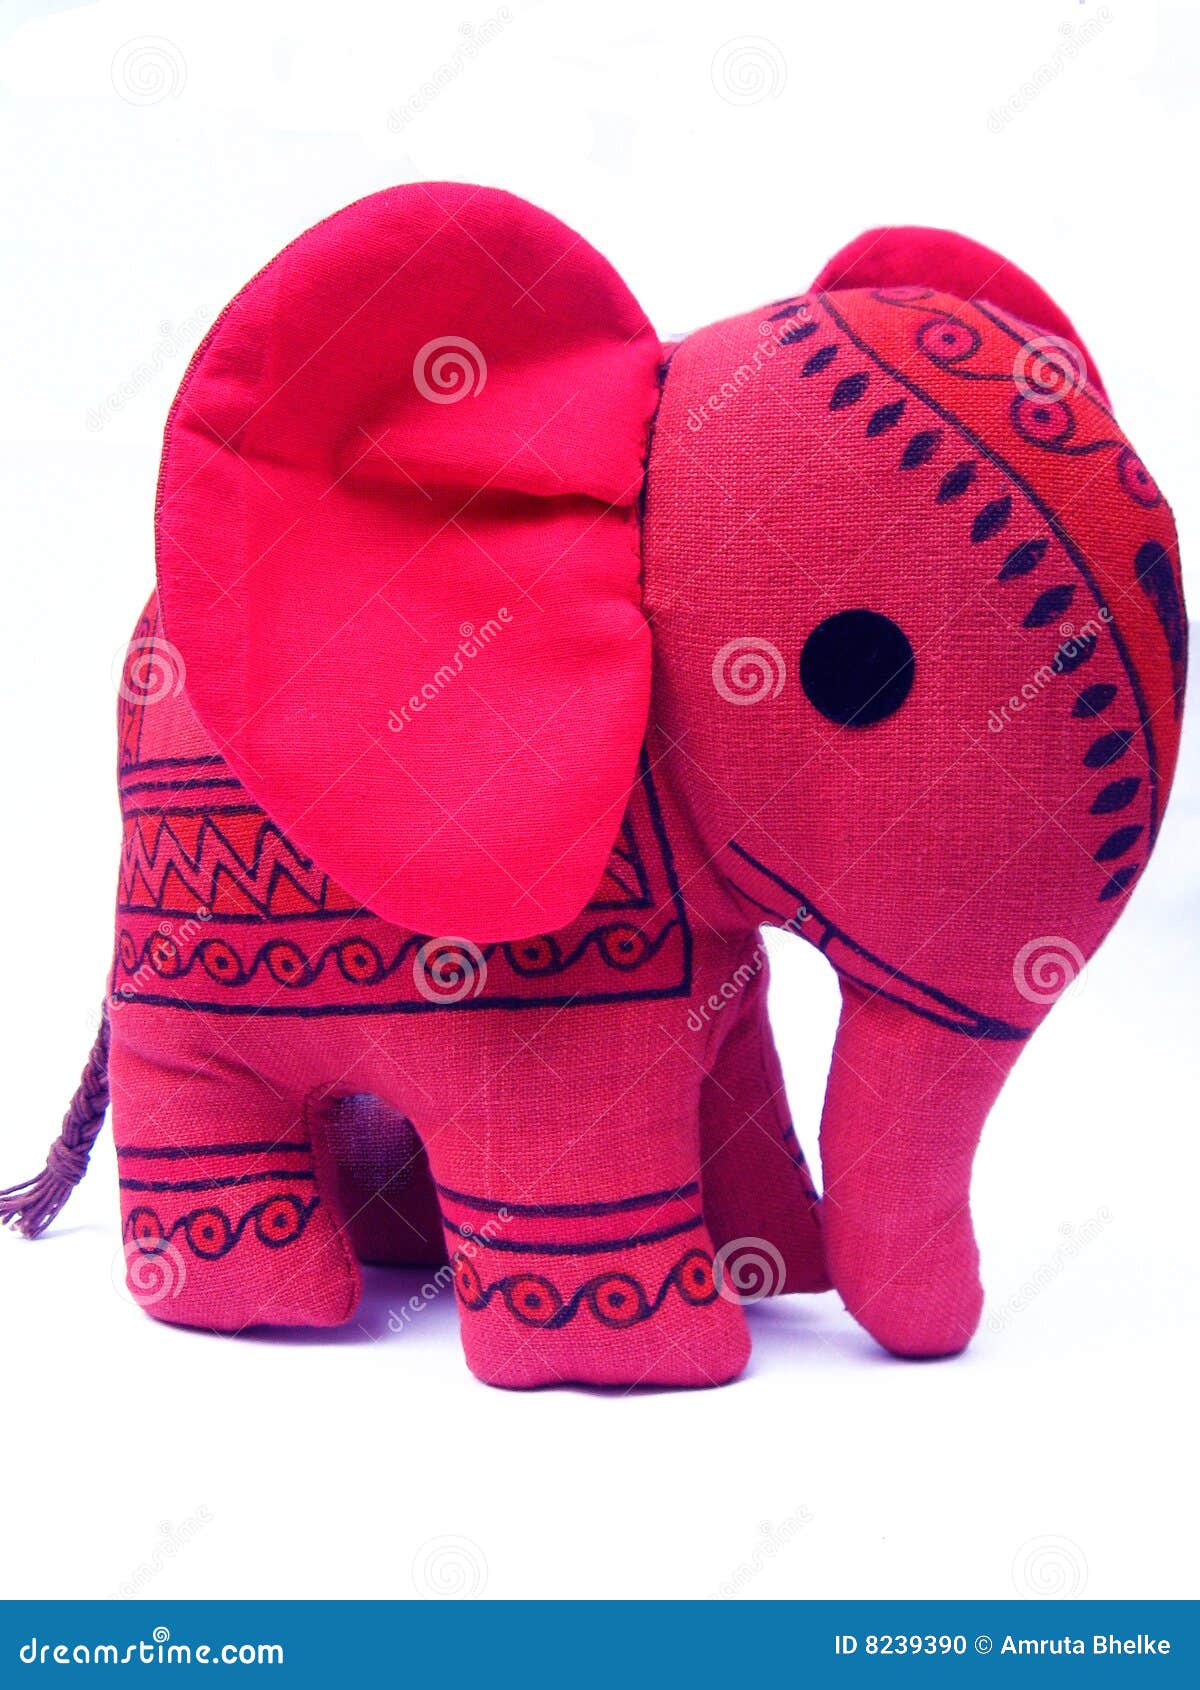 elephant toys for babies